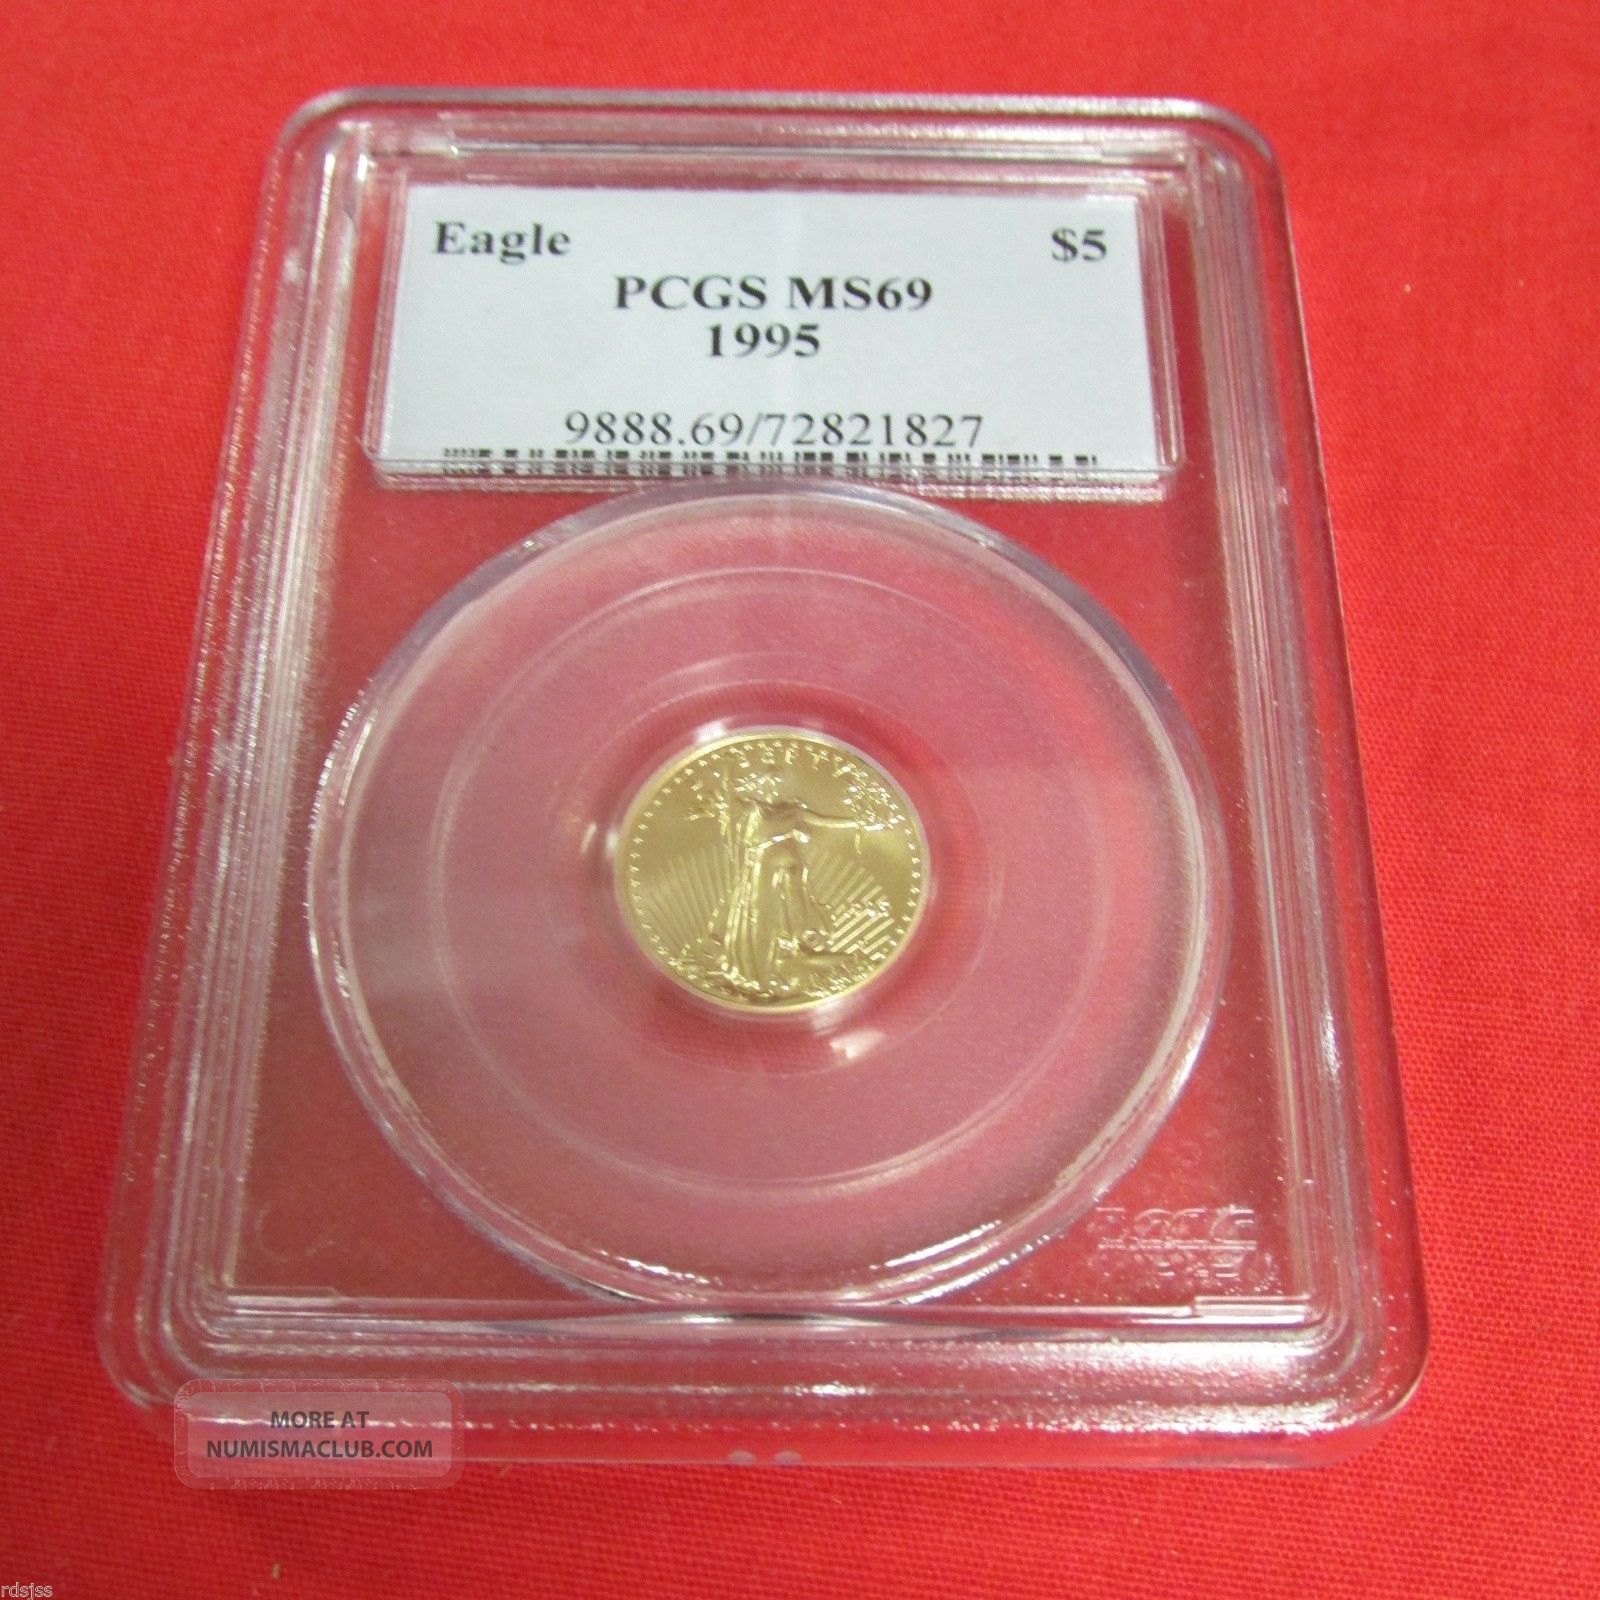 Pcgs Ms69 $5 American Eagle Gold Piece 1995 9888. 69/72821827